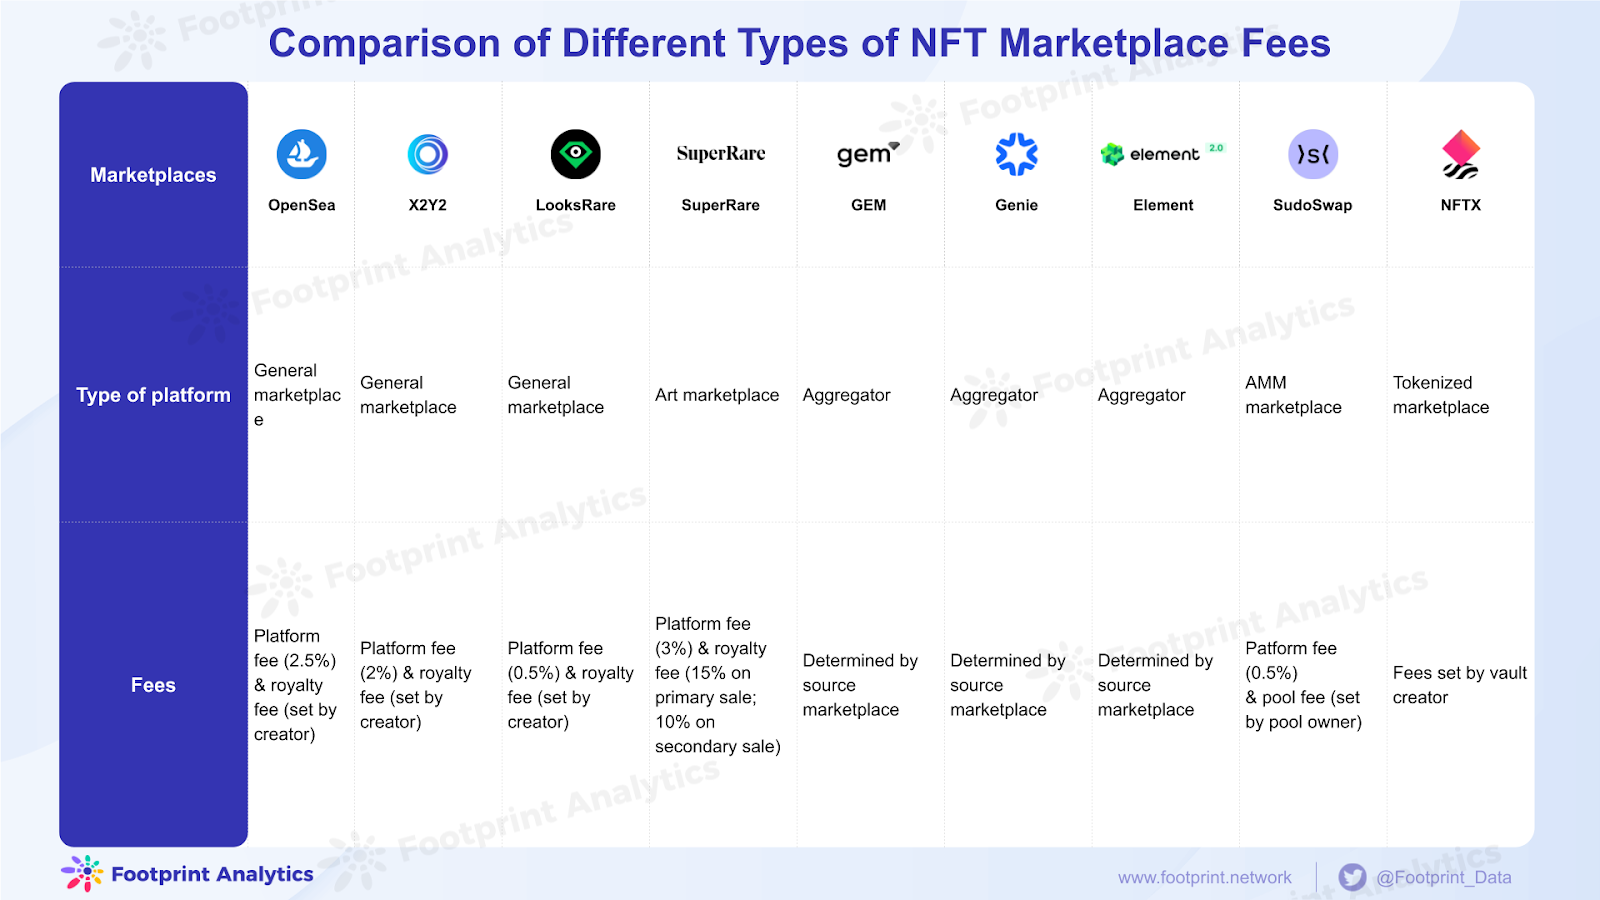 Multi-accounting: what is this. It is often the case that more than…, by  Swap.Net - NFT Aggregator & Exchange, Coinmonks